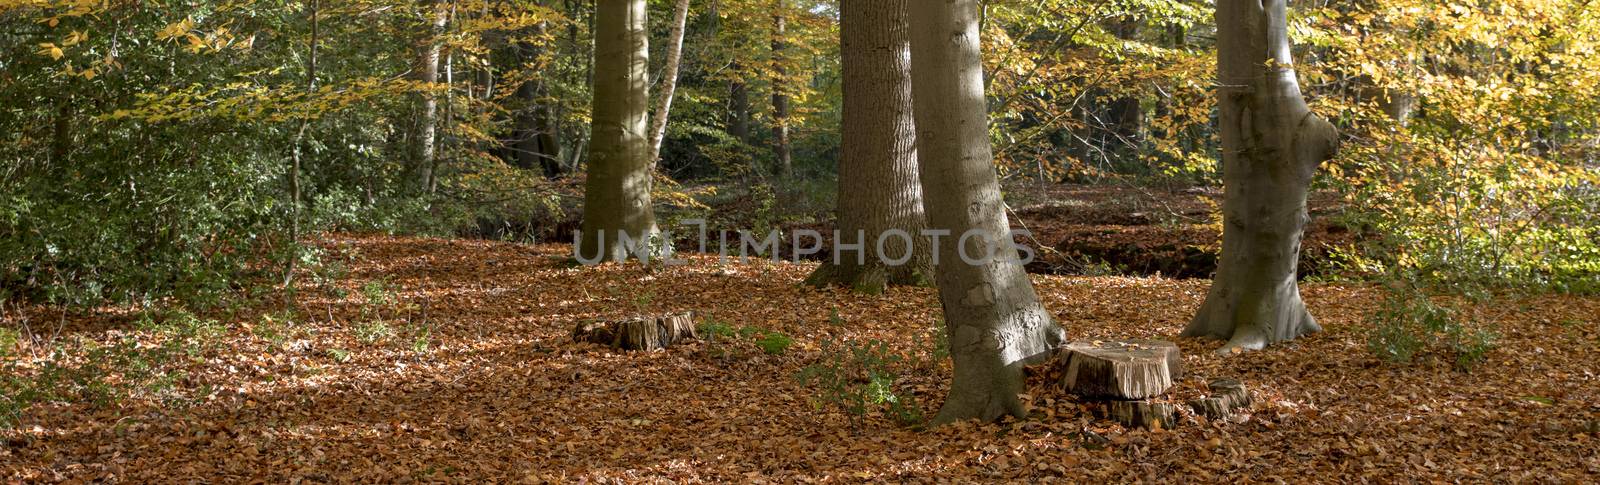 autumn forest with the golden brown leaves by compuinfoto